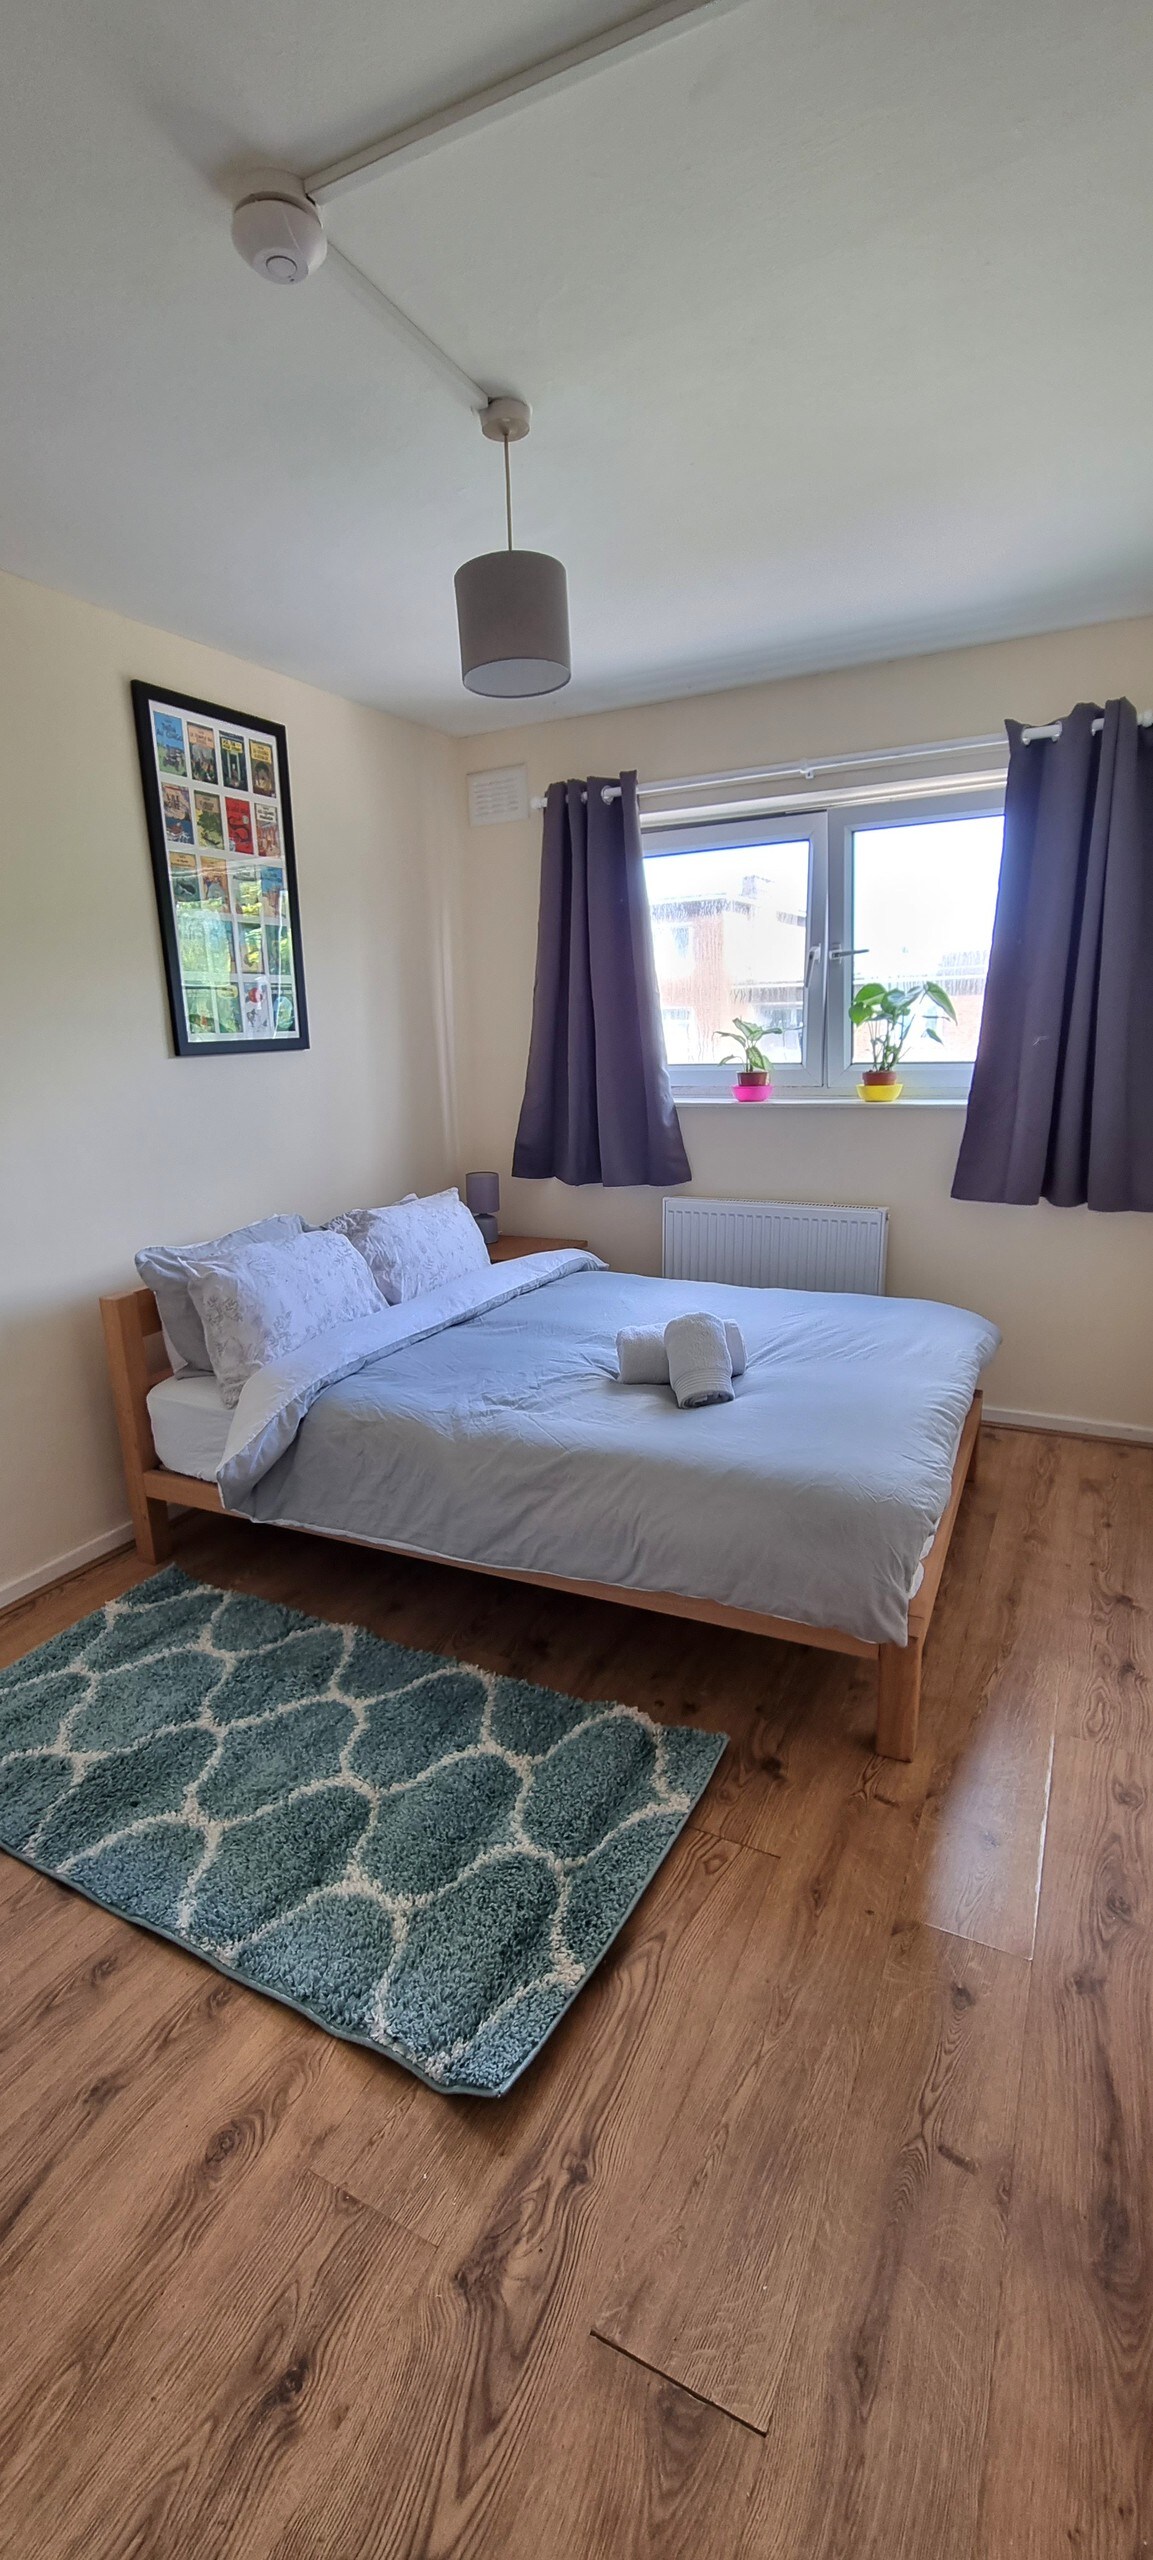 Double room 1 minute from Bermondsey Station